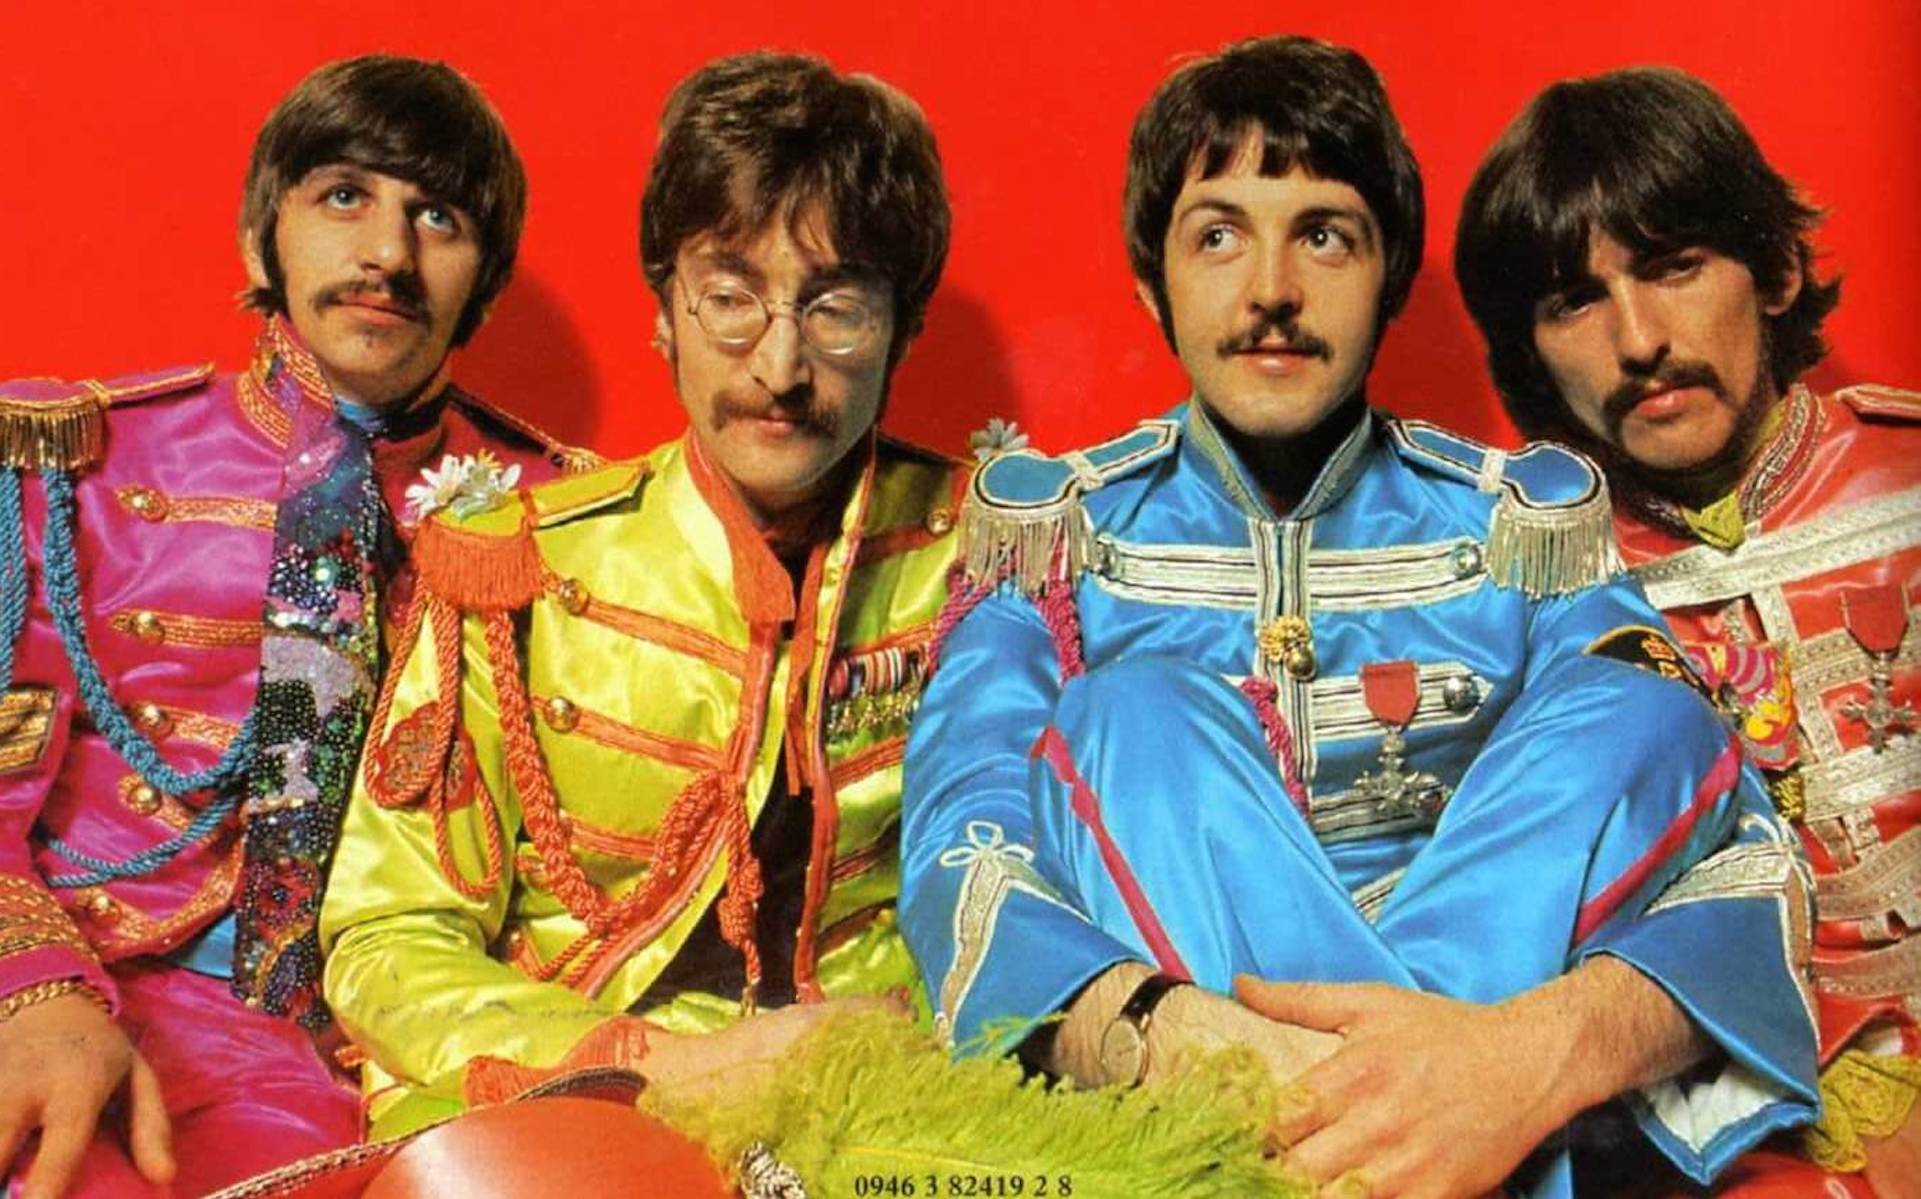 Mp3 pepper. Битлз сержант Пеппер. Sgt Pepper's Lonely Hearts Club Band. Sgt. Pepper s Lonely Hearts Club Band the Beatles. The Beatles 1967.